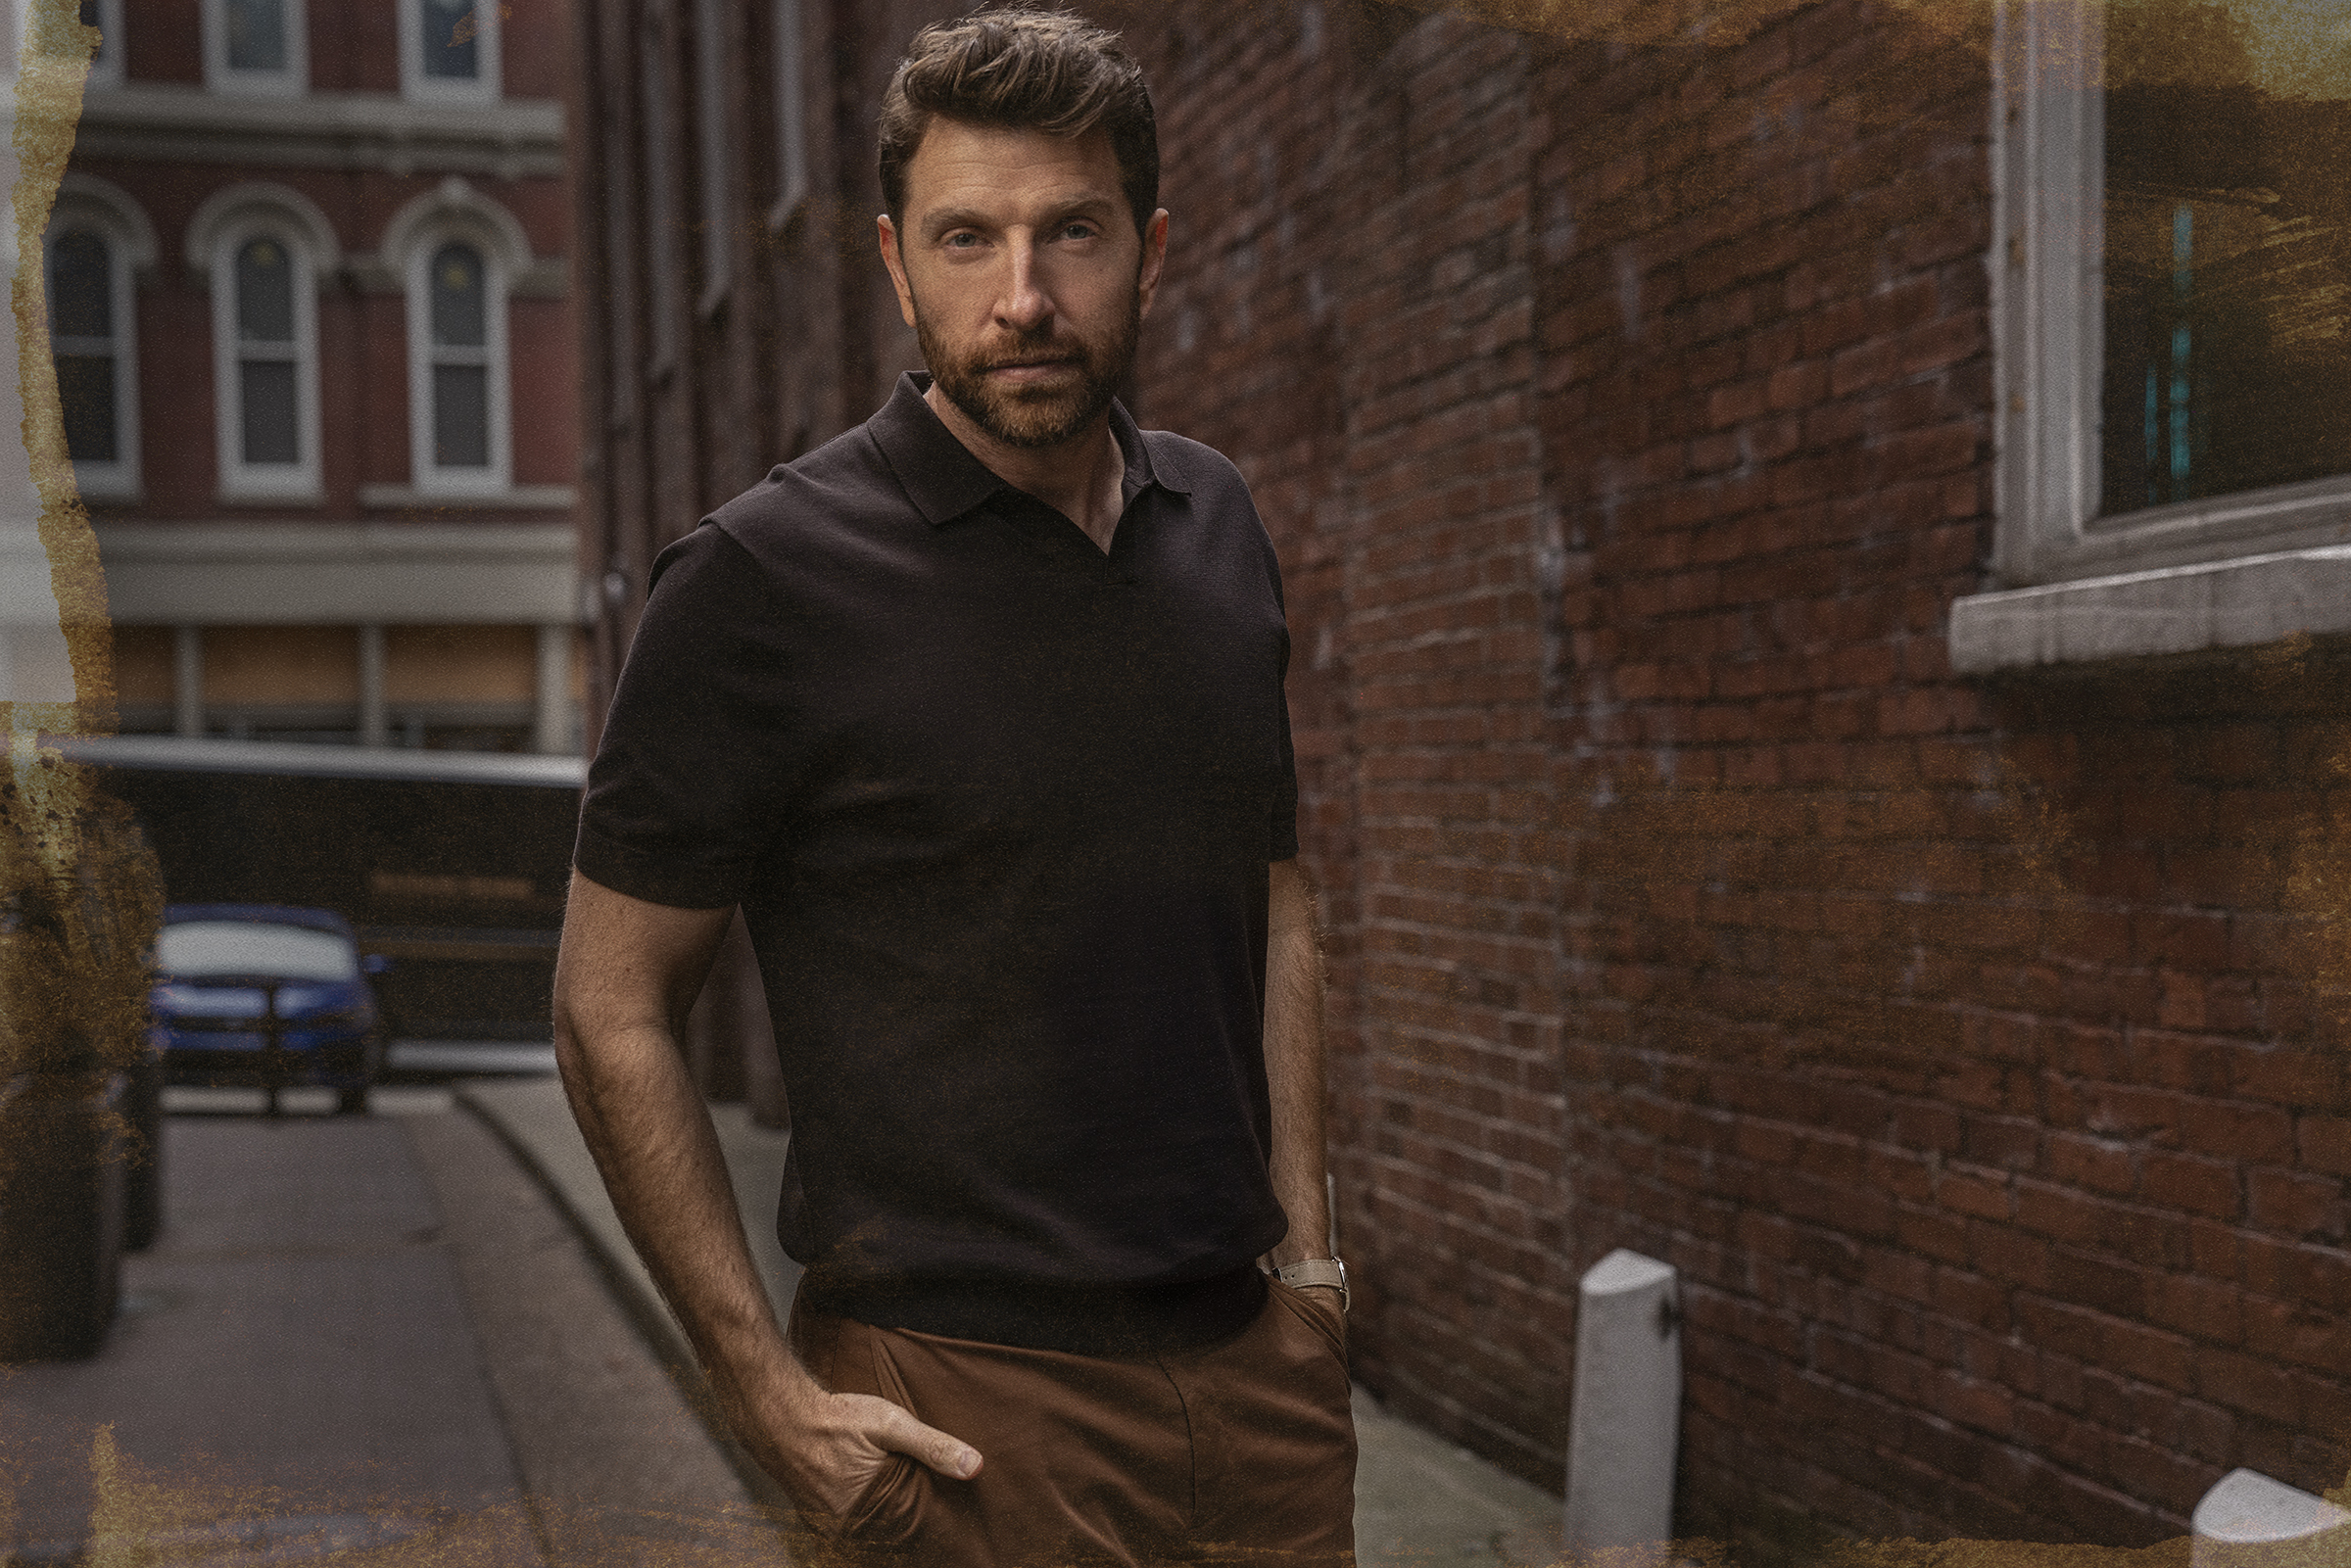 Brett Eldredge Says People Will Be Moved By New Album “Songs About You” (Exclusive)